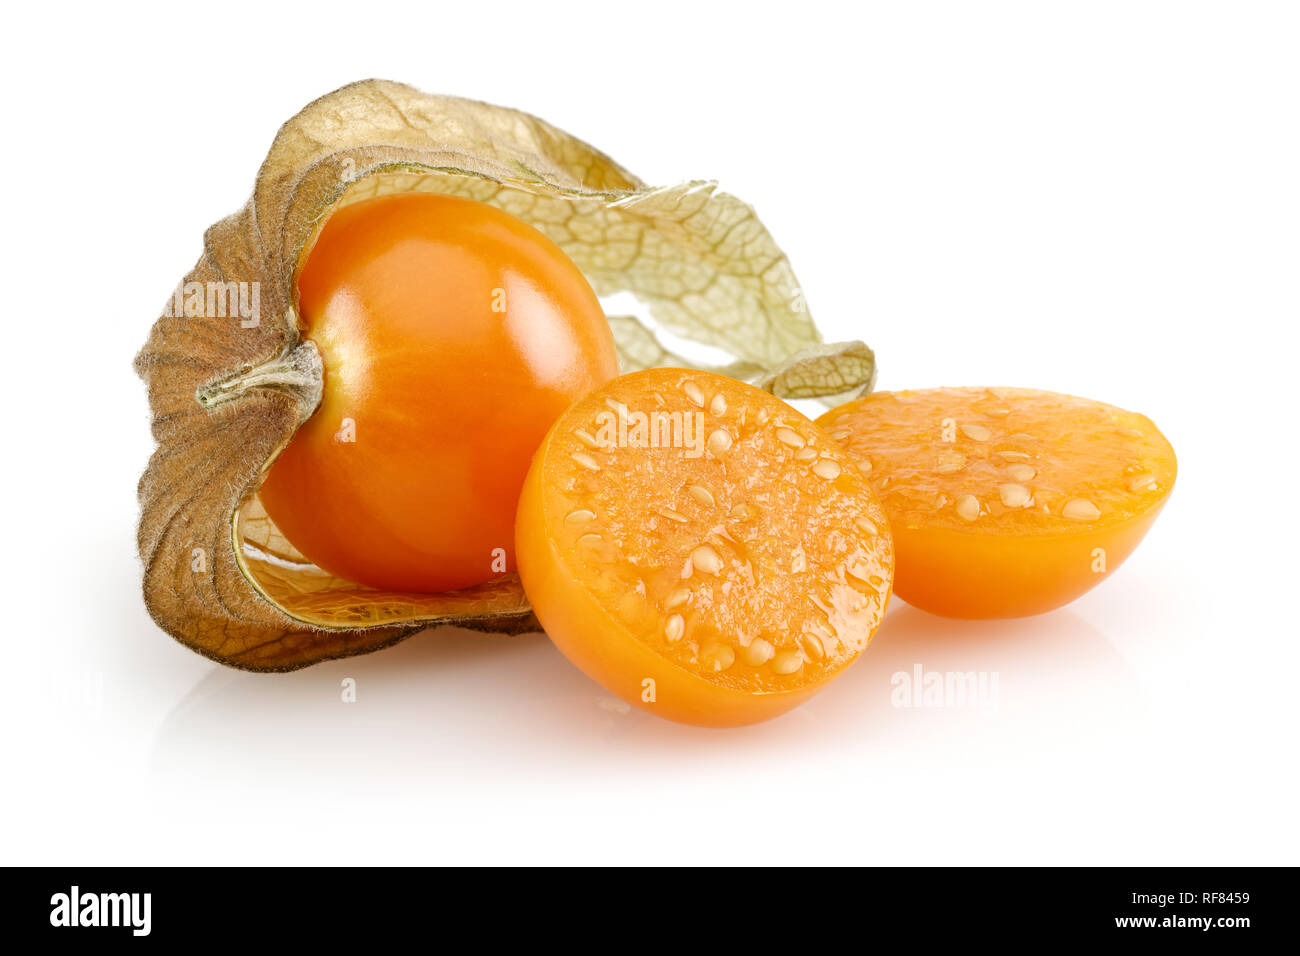 Physalis fruit or golden berry isolated on white background Stock Photo